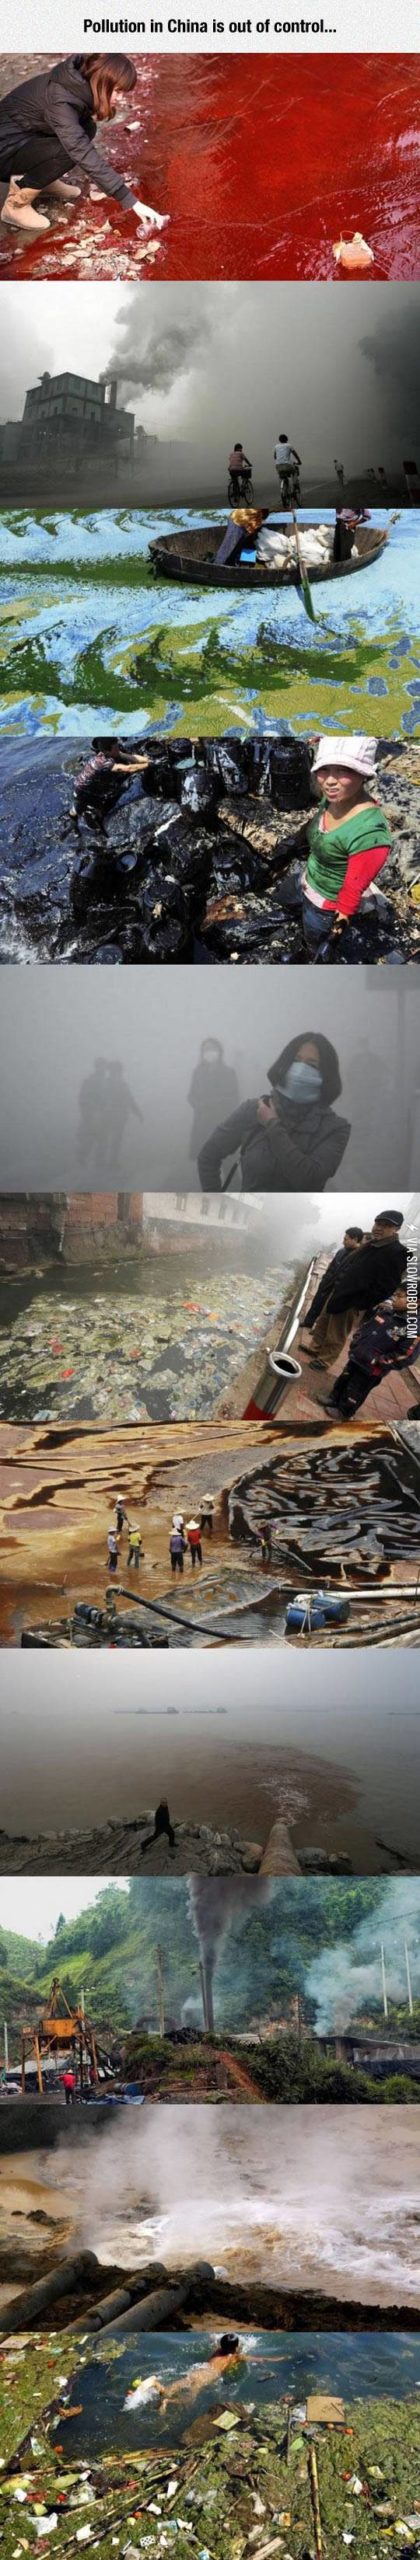 Pollution+in+China.